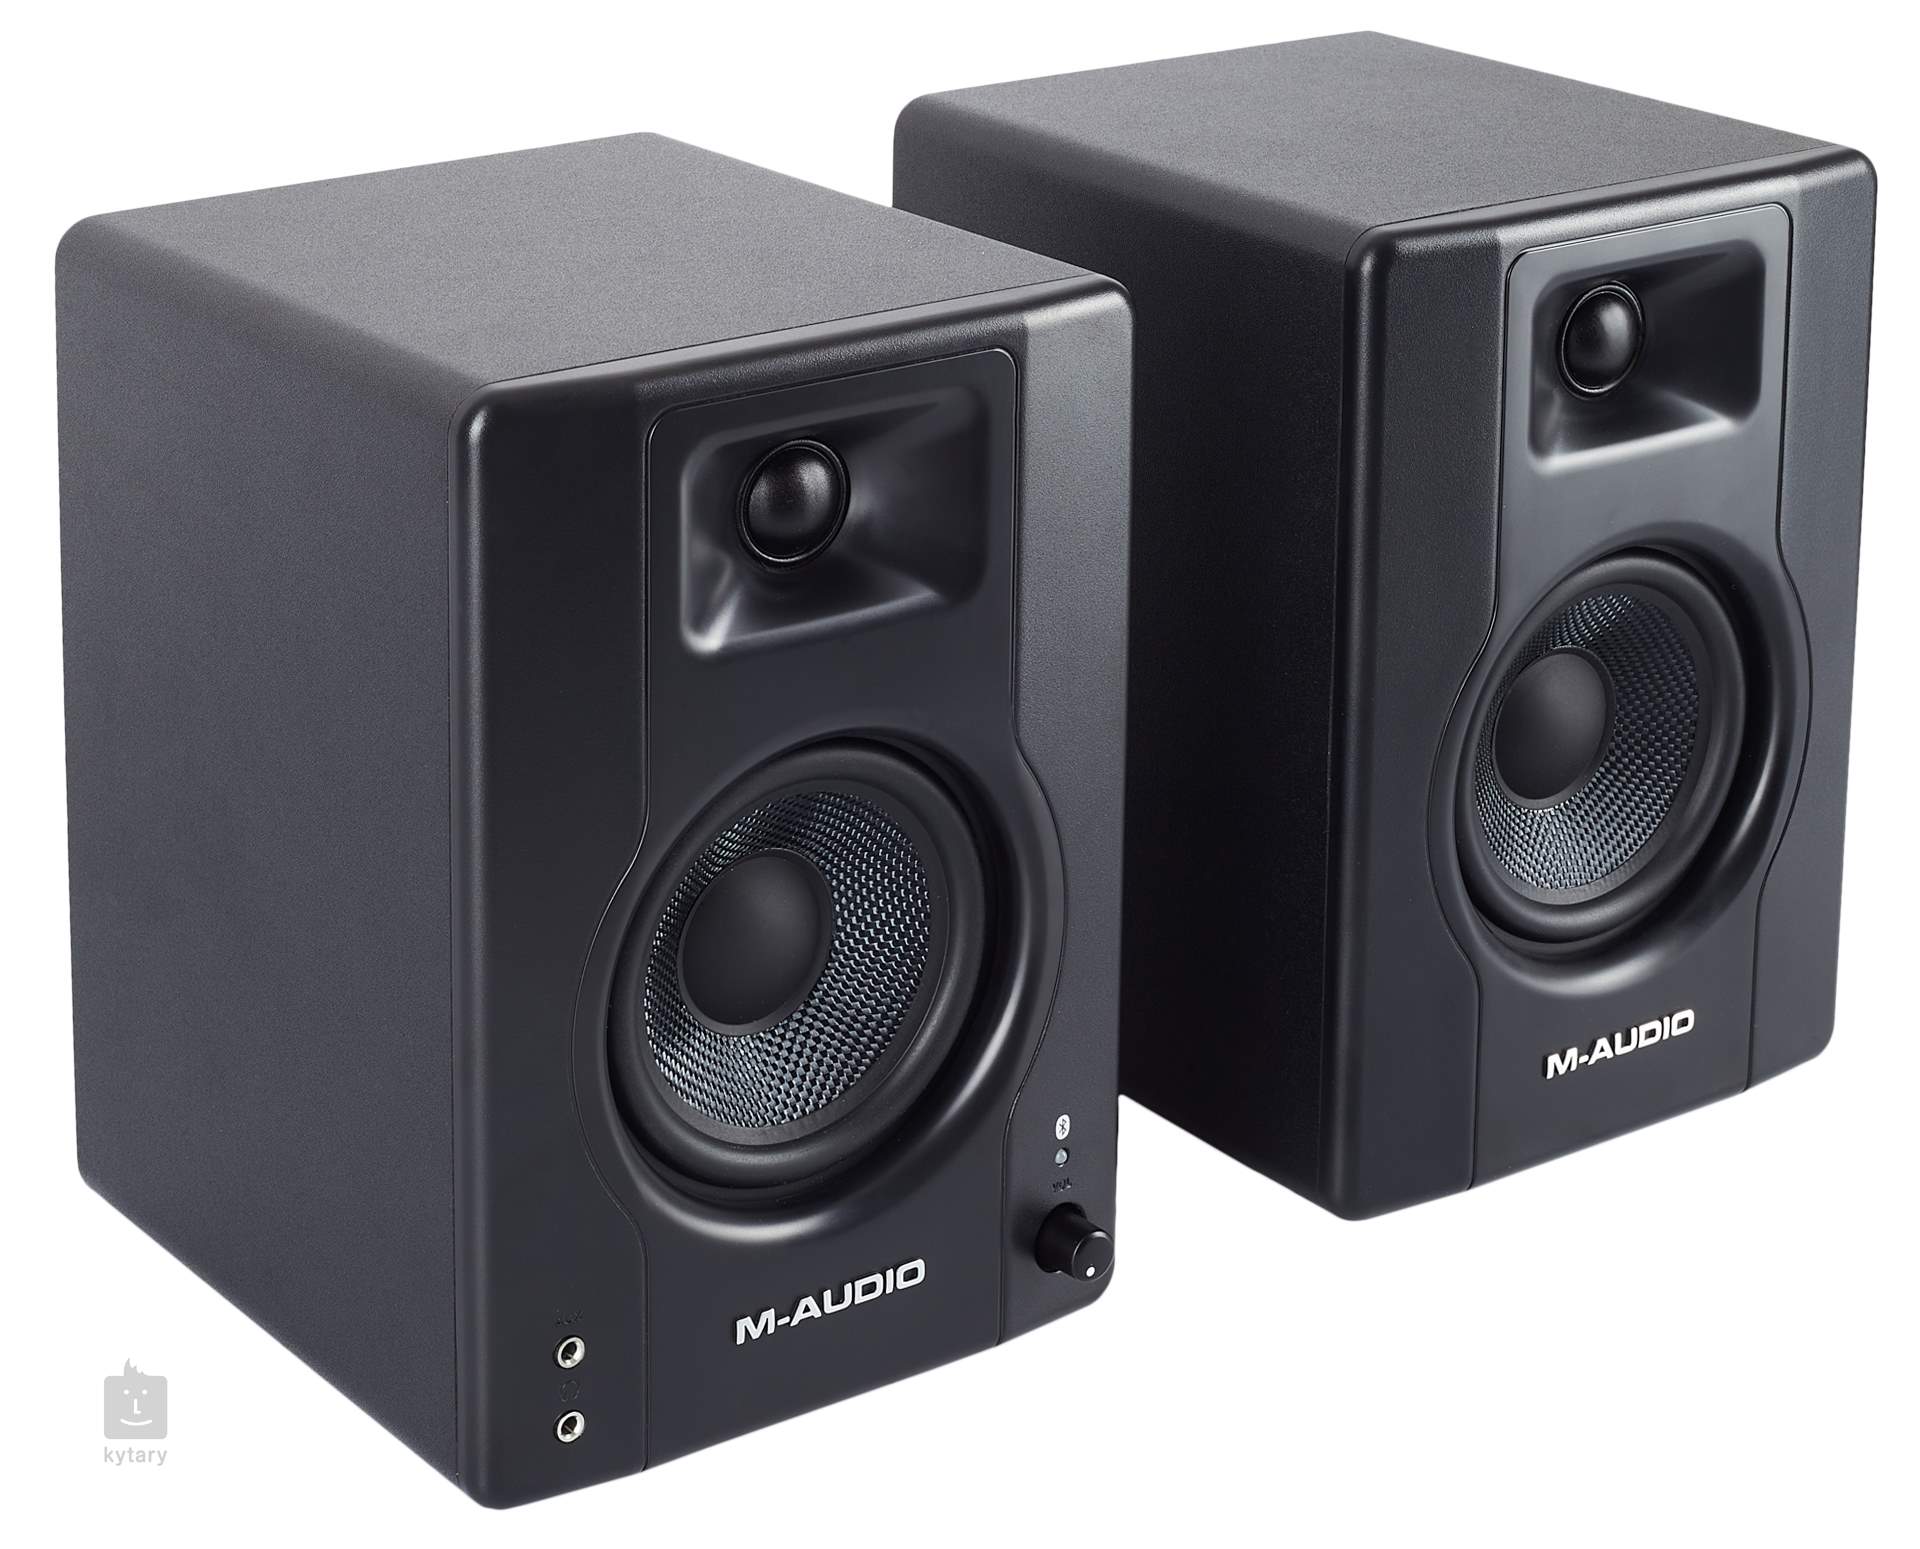 BLUETOOTH® MULTIMEDIA REFERENCE MONITORS, BX4 BT